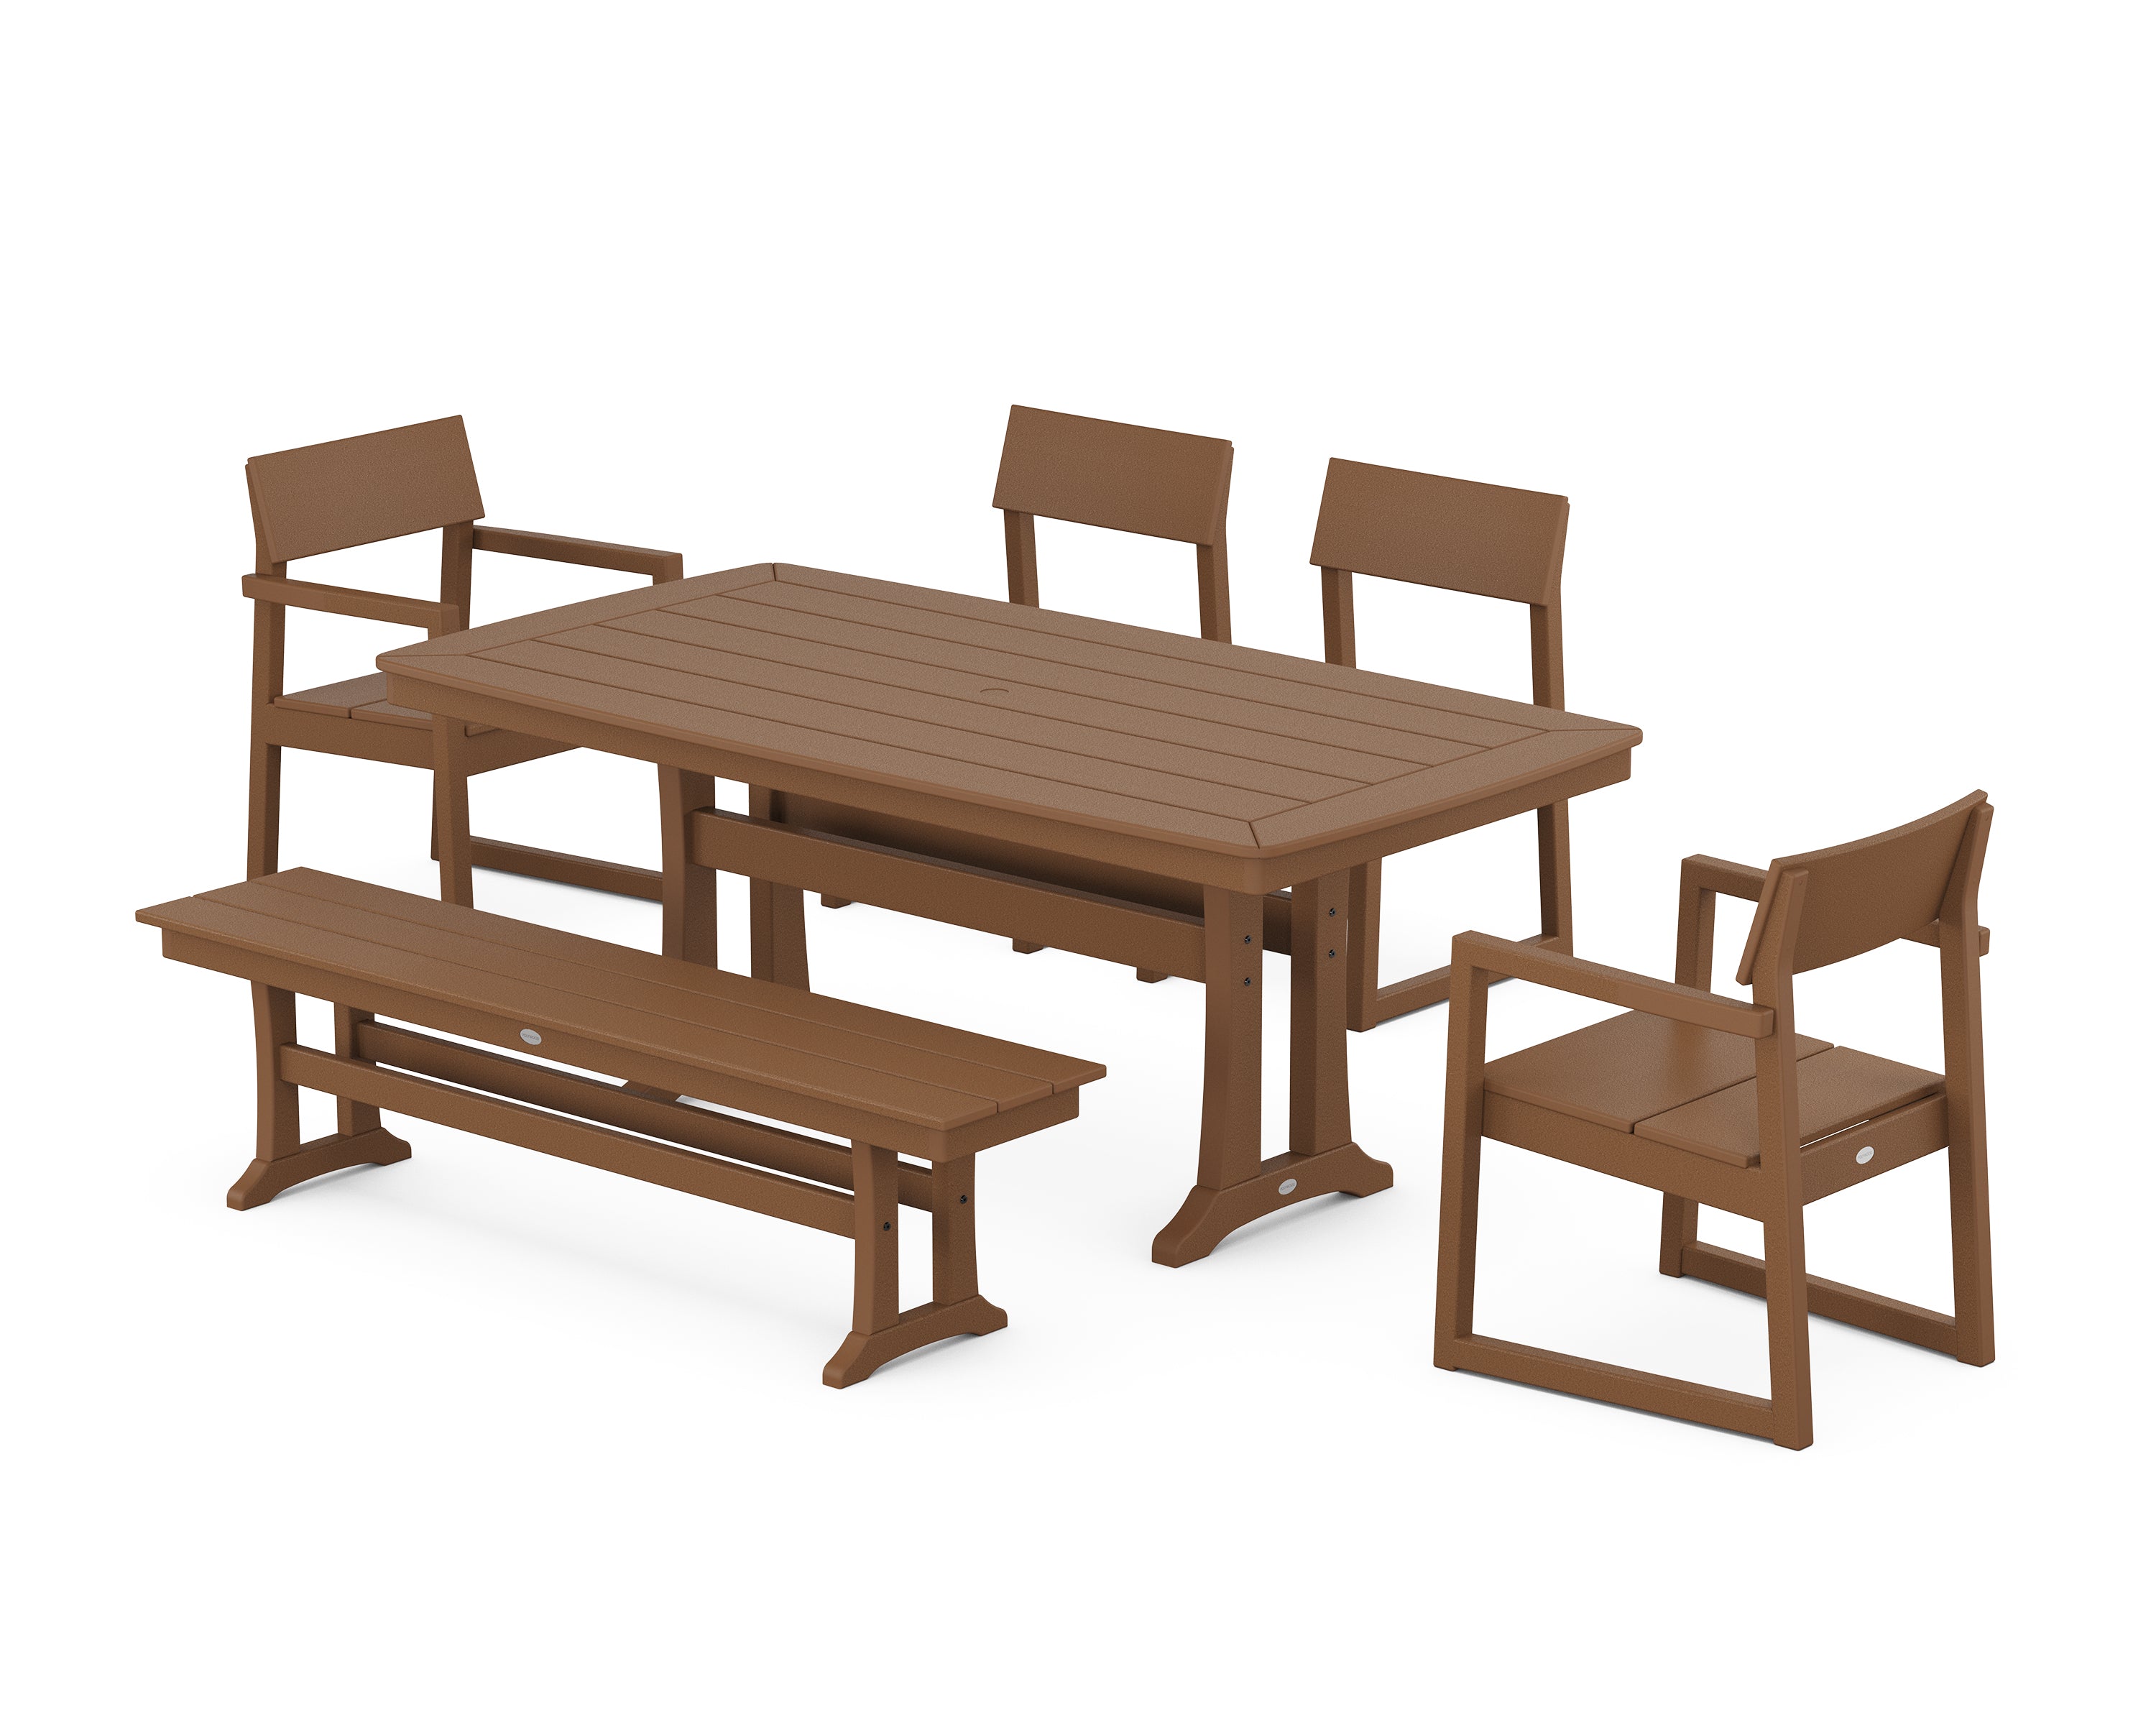 POLYWOOD® EDGE 6-Piece Dining Set with Trestle Legs in Teak